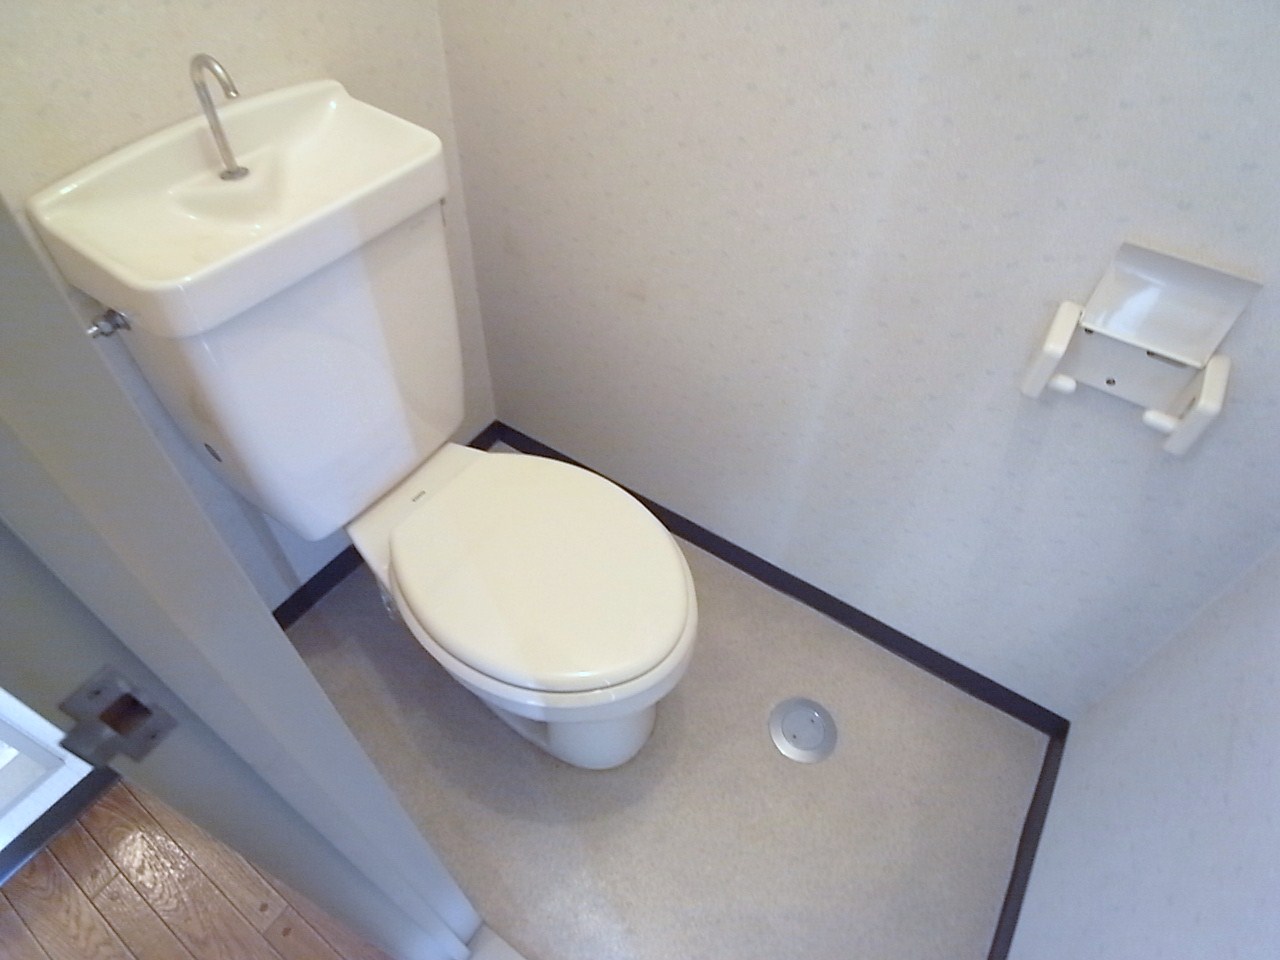 Toilet. Wide and clean toilet